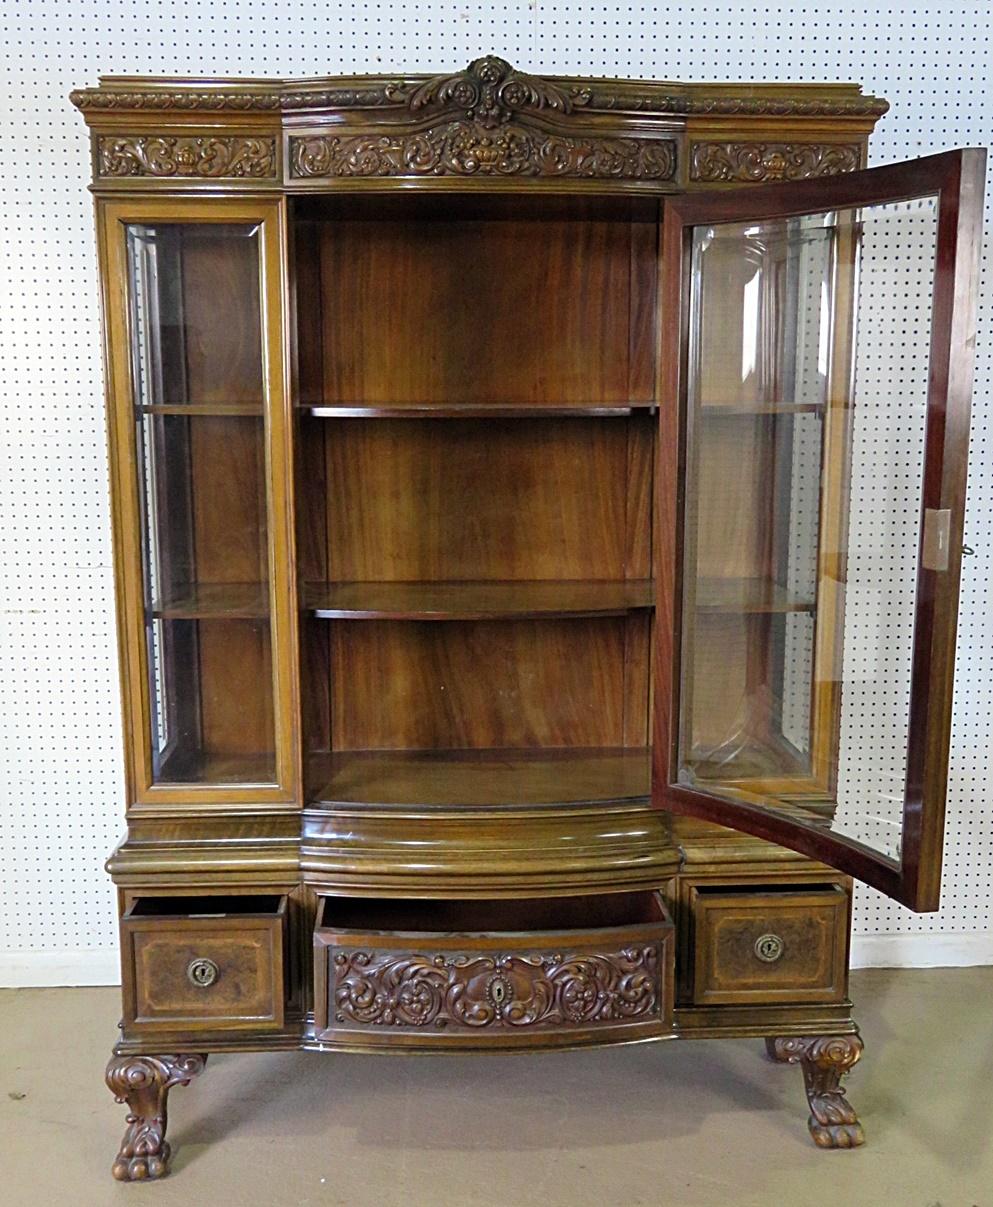 Georgian style inlaid china cabinet with beveled glass door containing 2 shelves over 3 drawers and bronze accents.